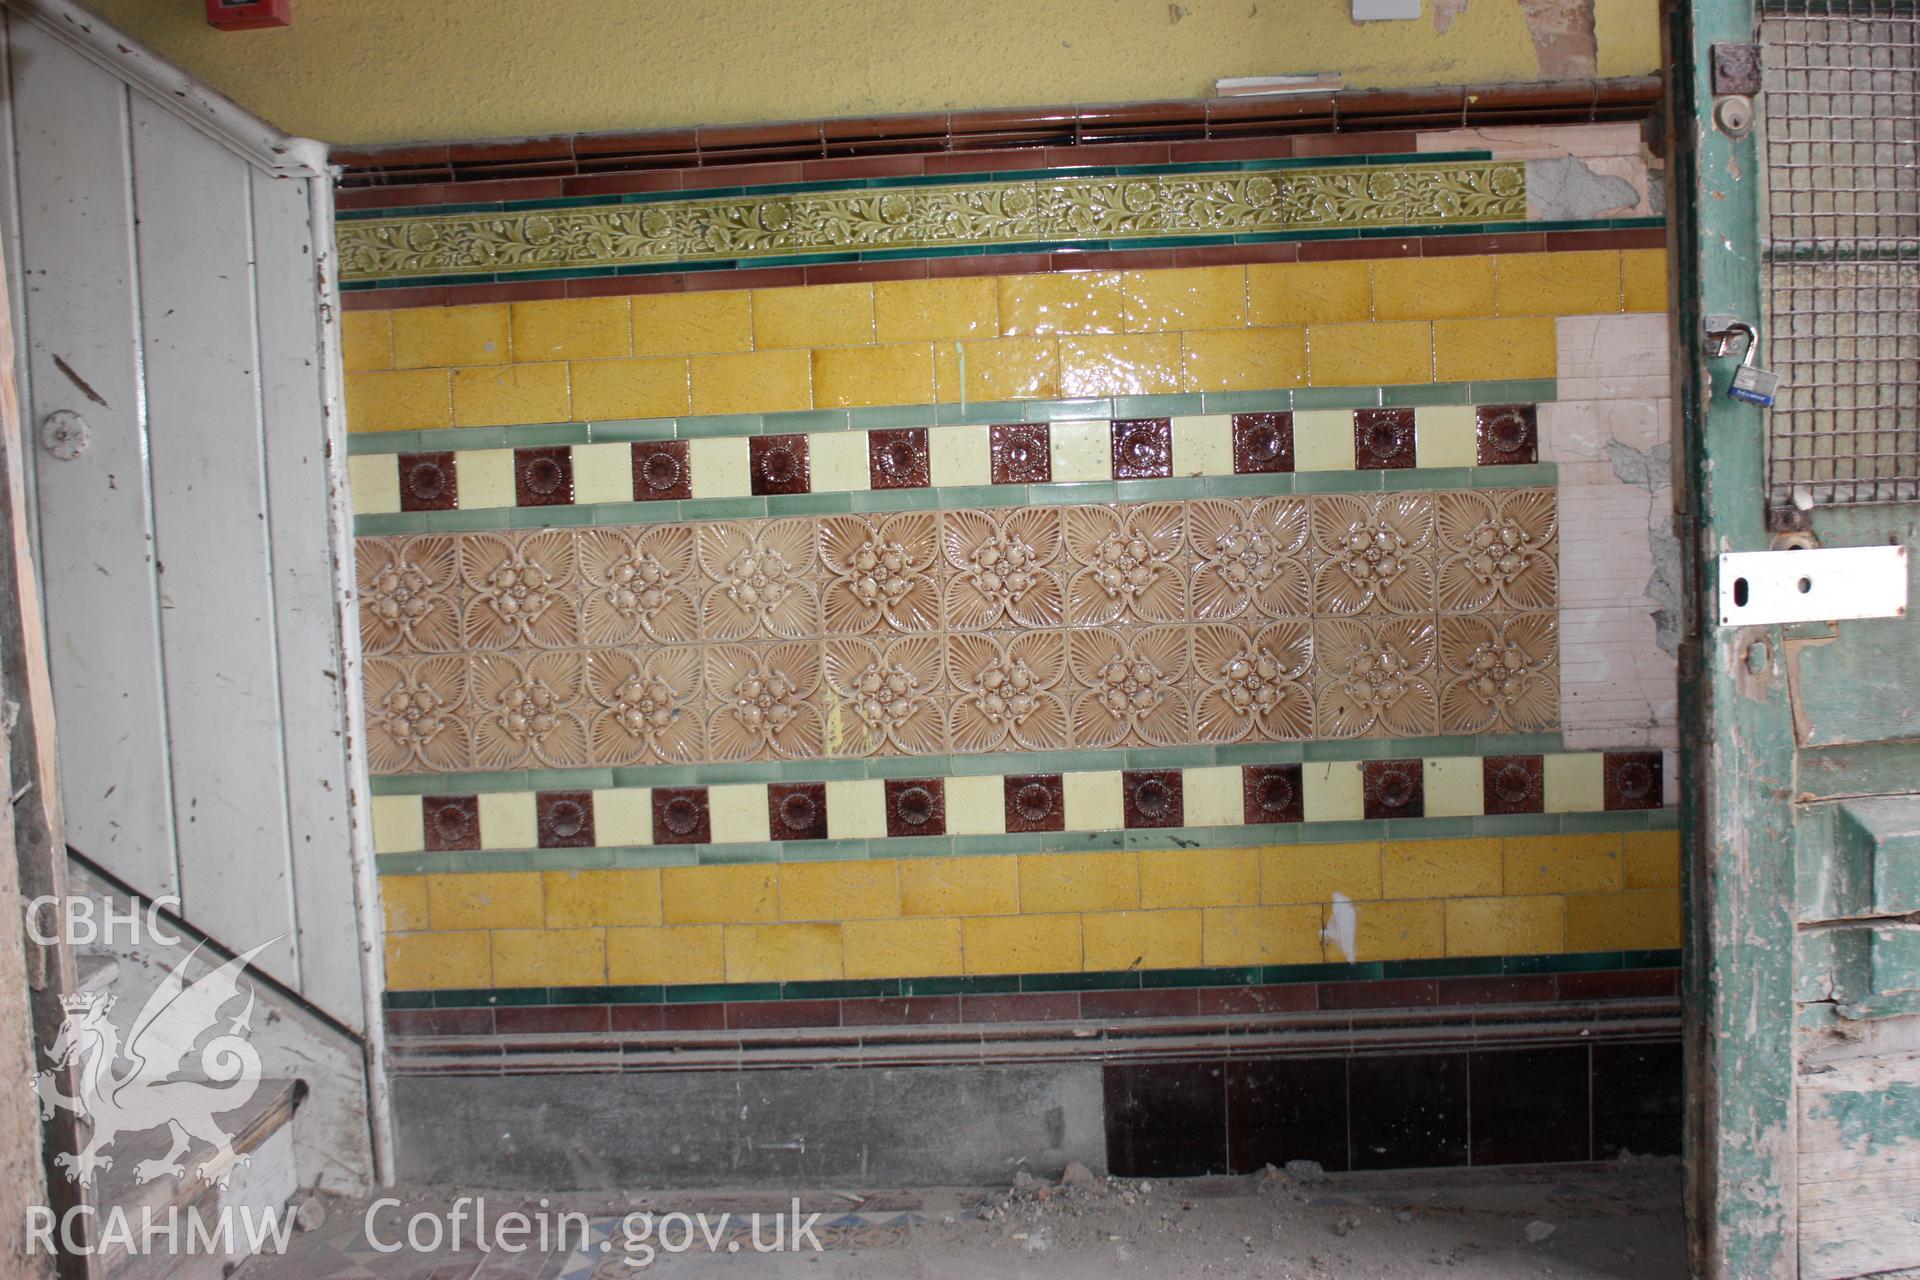 Colour photograph showing detail of tiled wall at base of stair at the Old Auction Rooms/ Liberal Club in Aberystwyth. Photographic survey conducted by Geoff Ward on 9th June 2010 during repair work prior to conversion into flats.